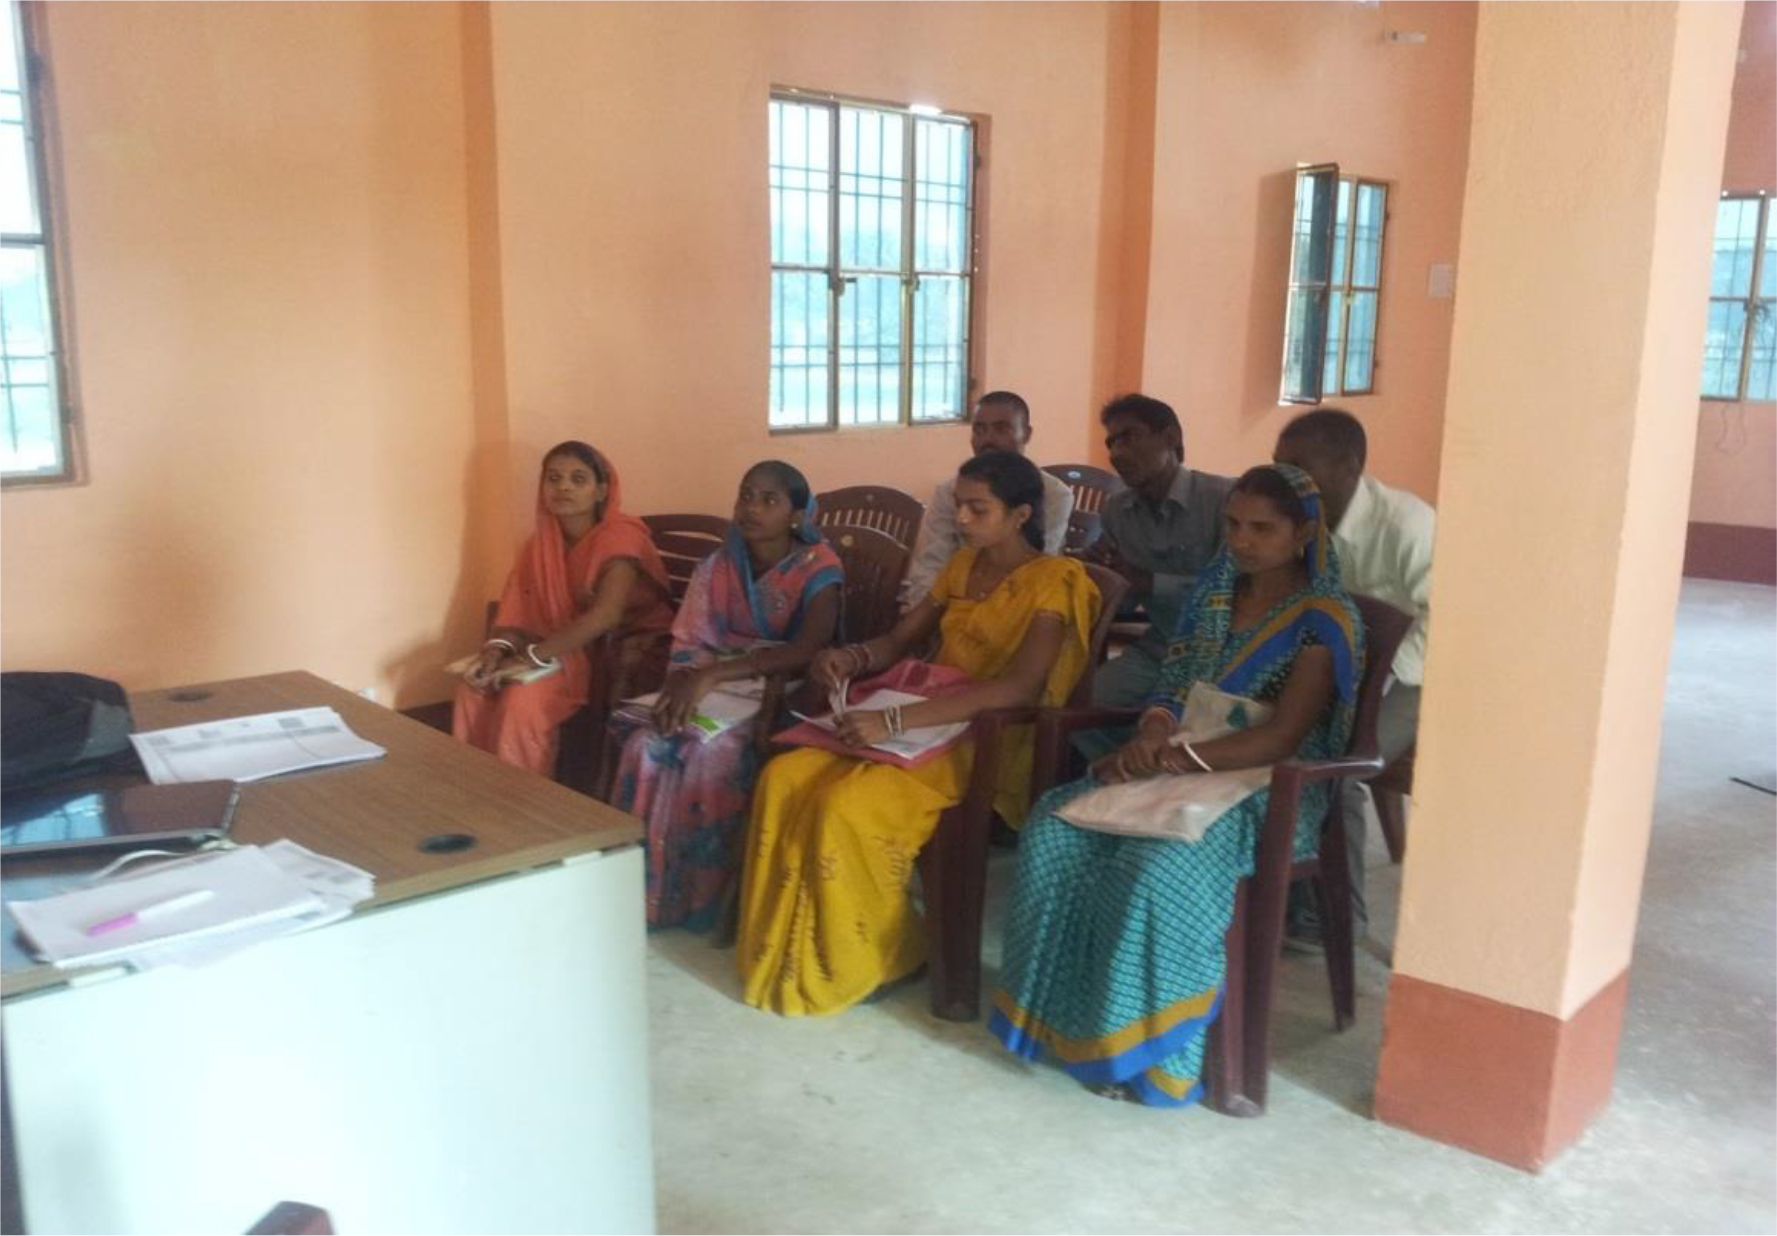 The image shows a group of villagers consisting of four women and three men with plastic bags, are seated on chairs inside a building. They are attentively looking at the front of the room. In front of them is a desk with some papers, a pen, a laptop and a bag.